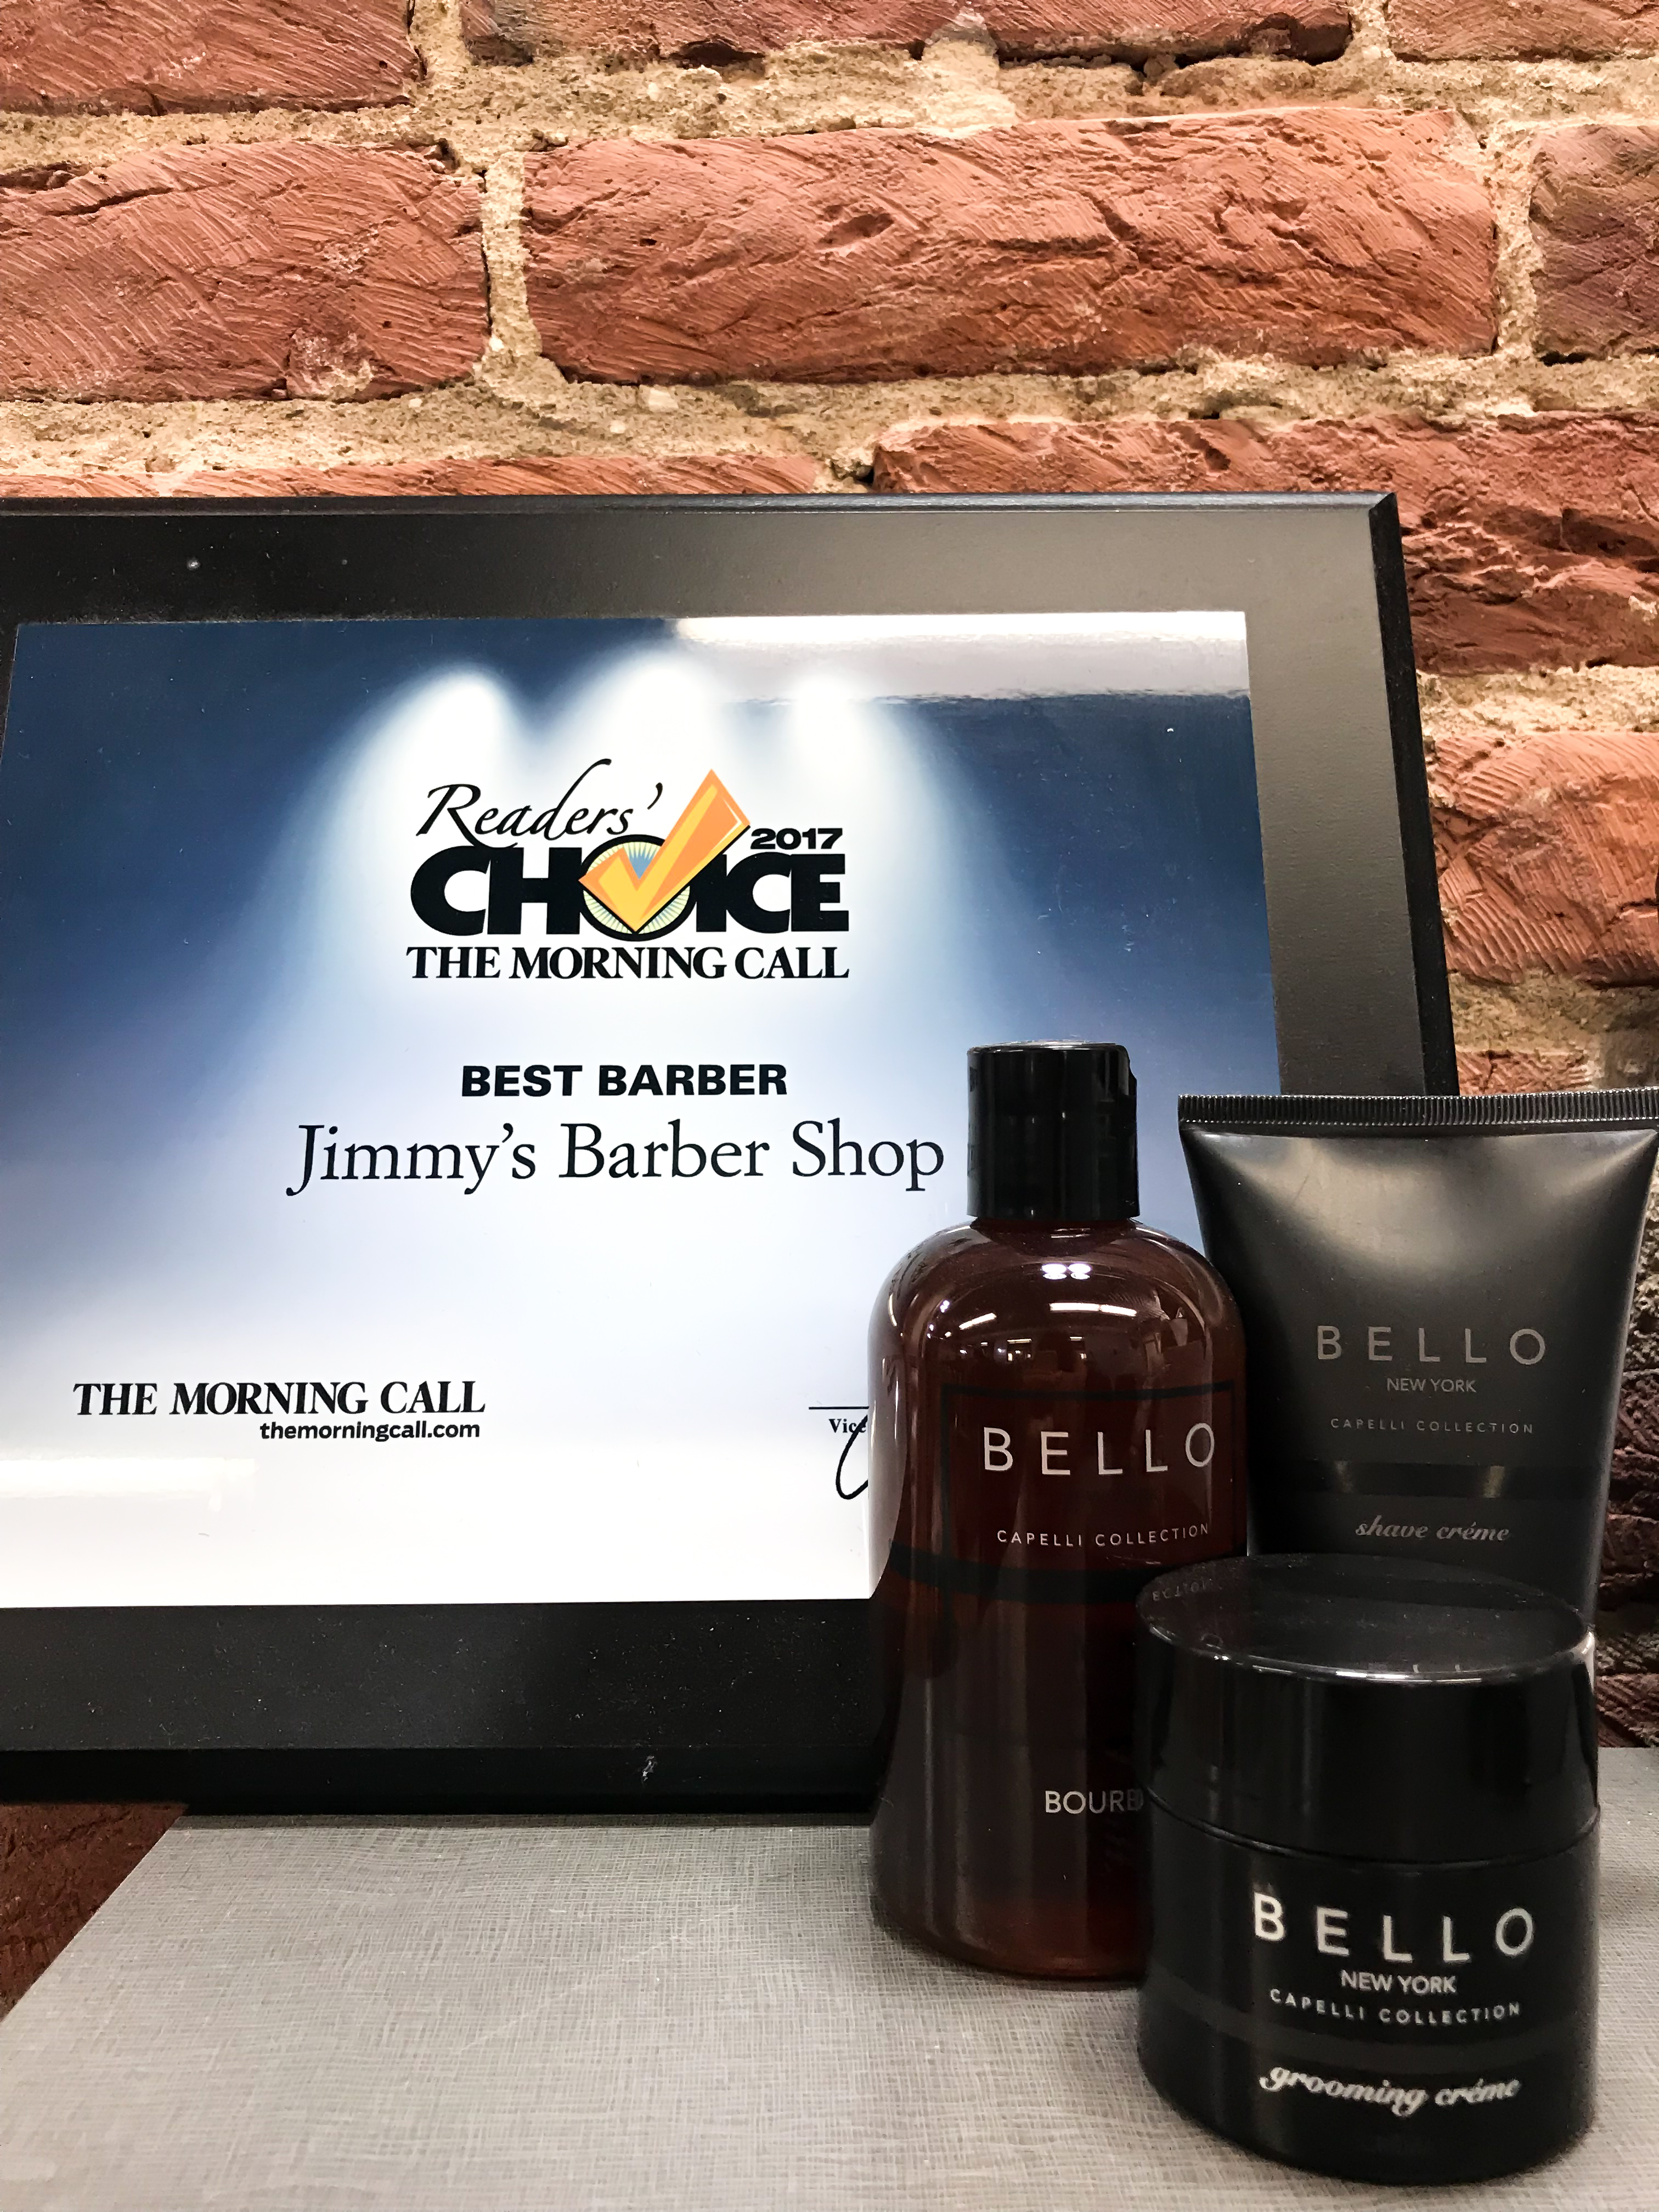 Jimmy’s Barbershop Look sharp this Father’s Day with 25% off all services at Jimmy’s Barbershop for Gold Card members.